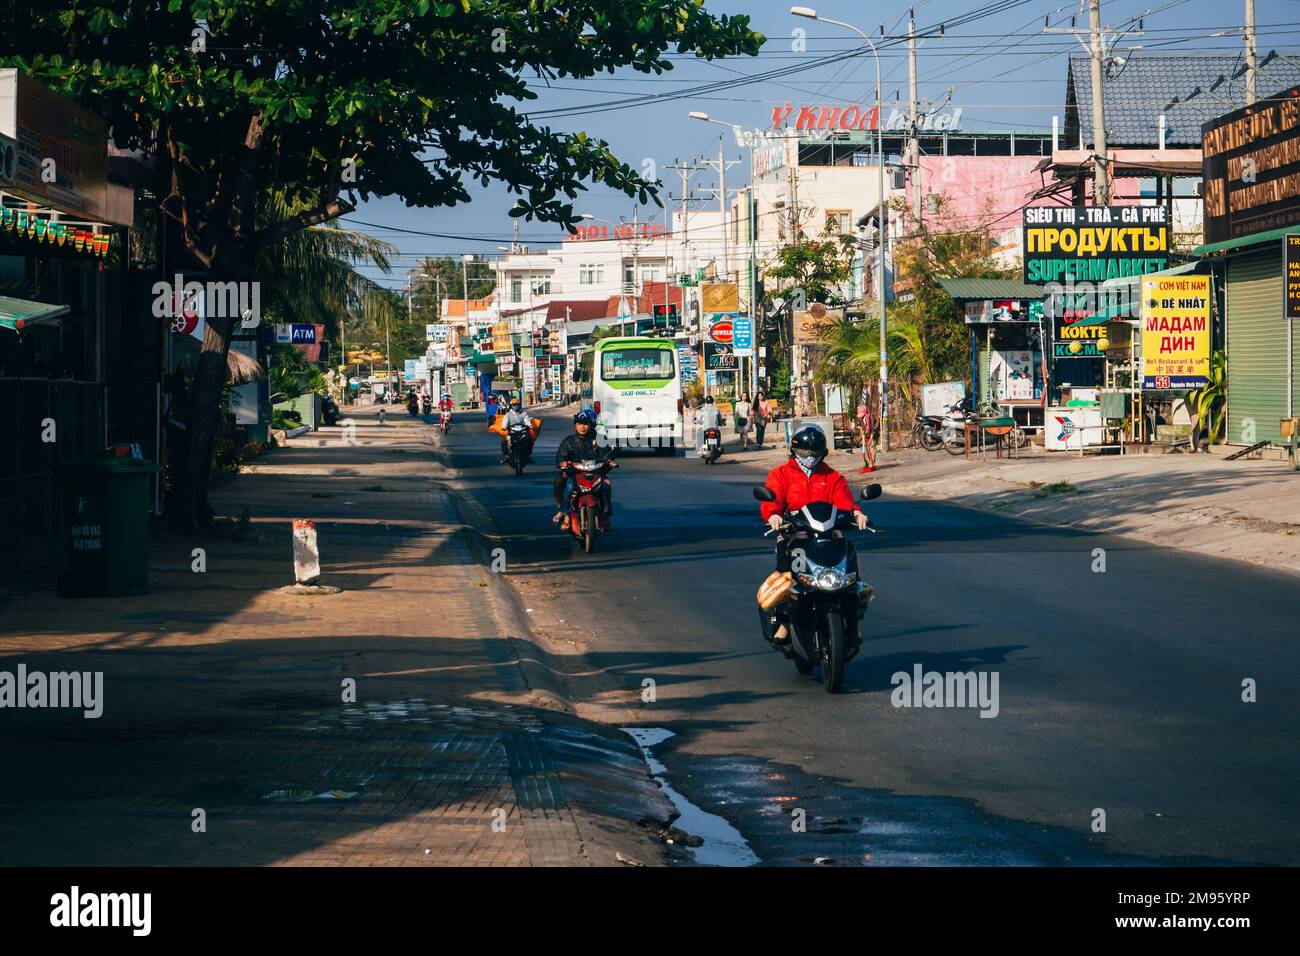 MUI NE, VIETNAM - CIRCA MARCH 2017: A lot of people riding on motorbikes on the road against the background of advertising and shops Stock Photo